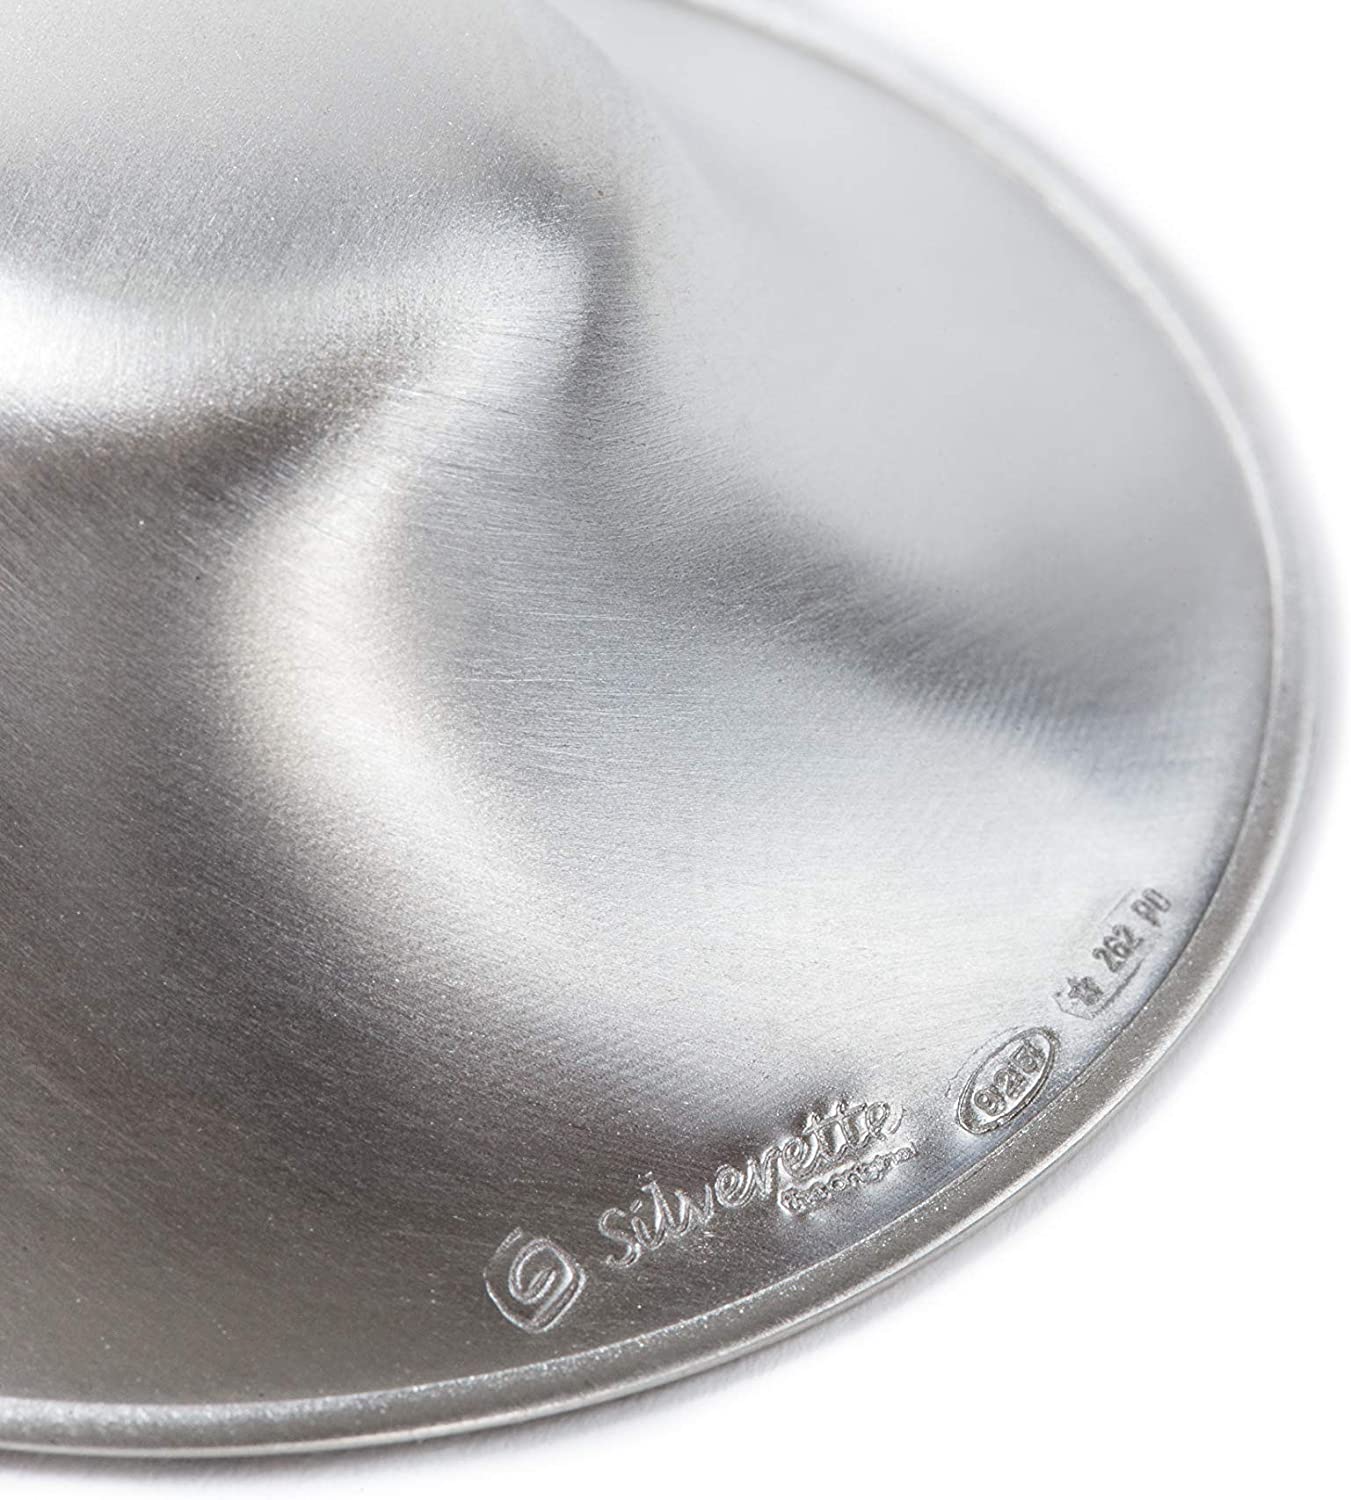 Difference between silver nipple shields and silicon nipple shields -  Silverette